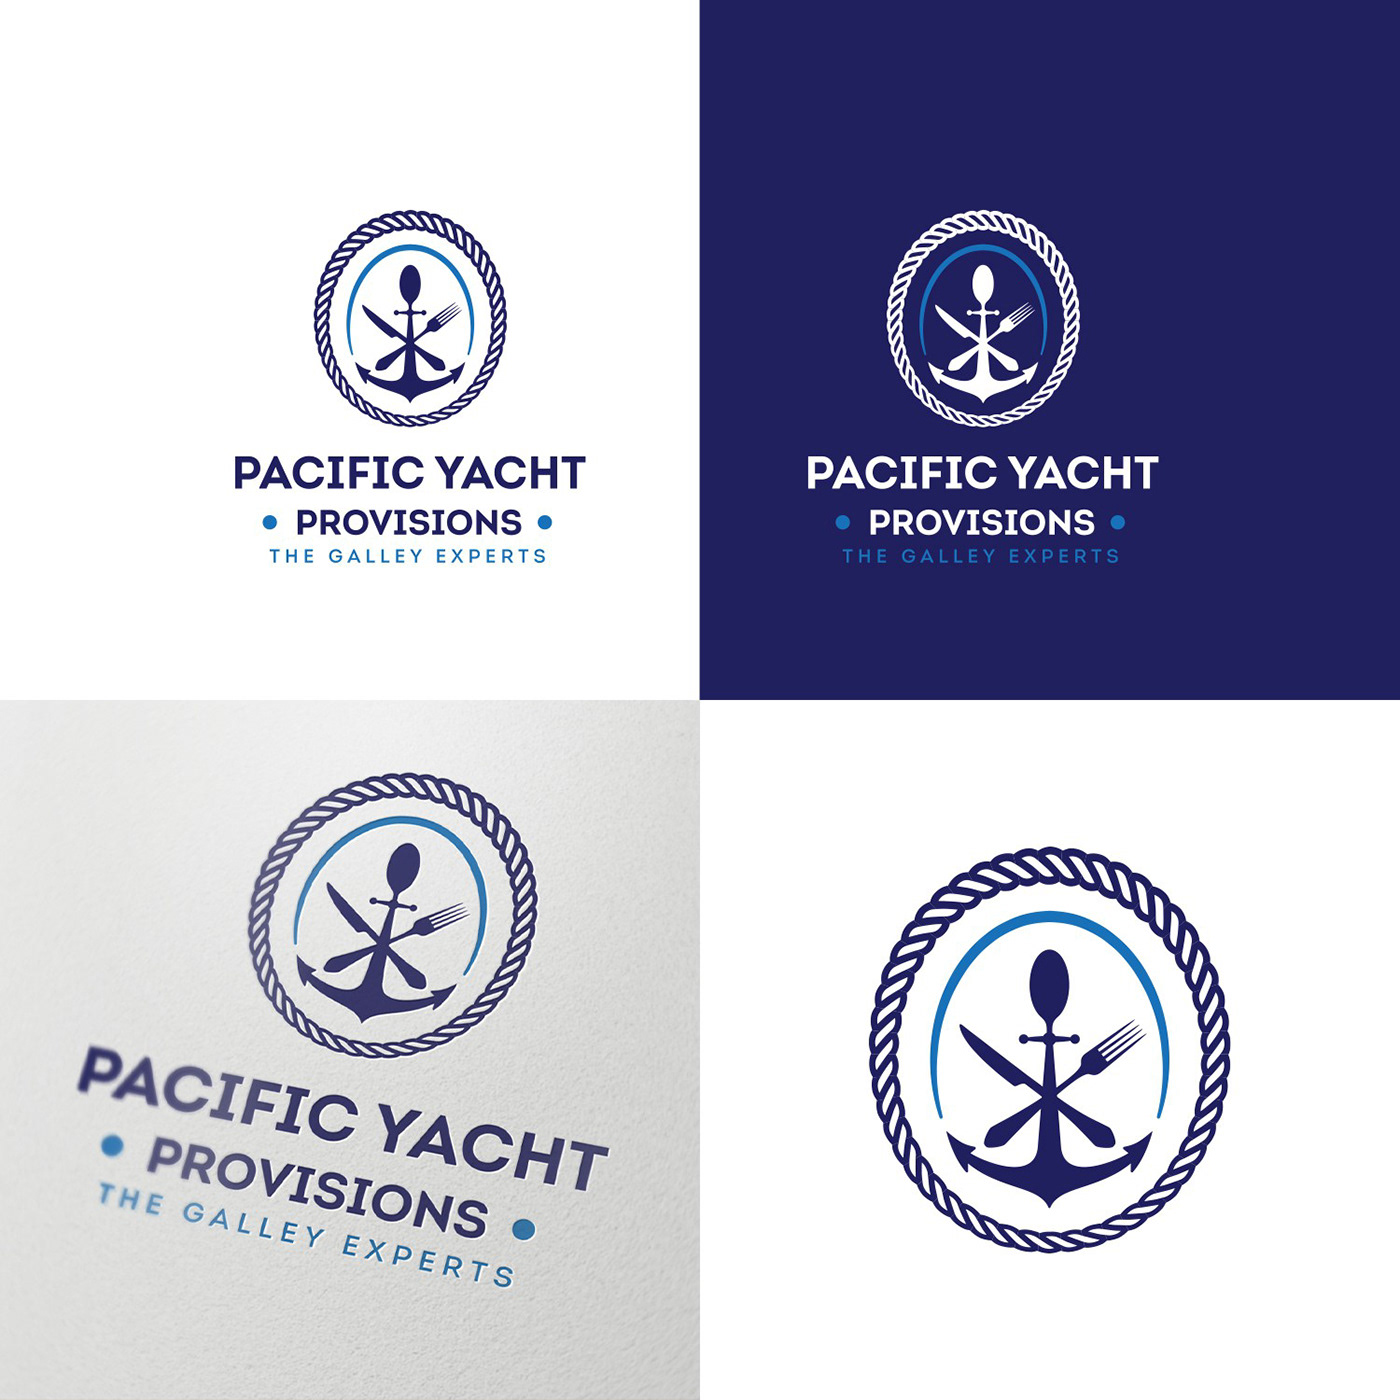 anchor cutlery food catering company logo marine maritime restaurant rope seafood yacht